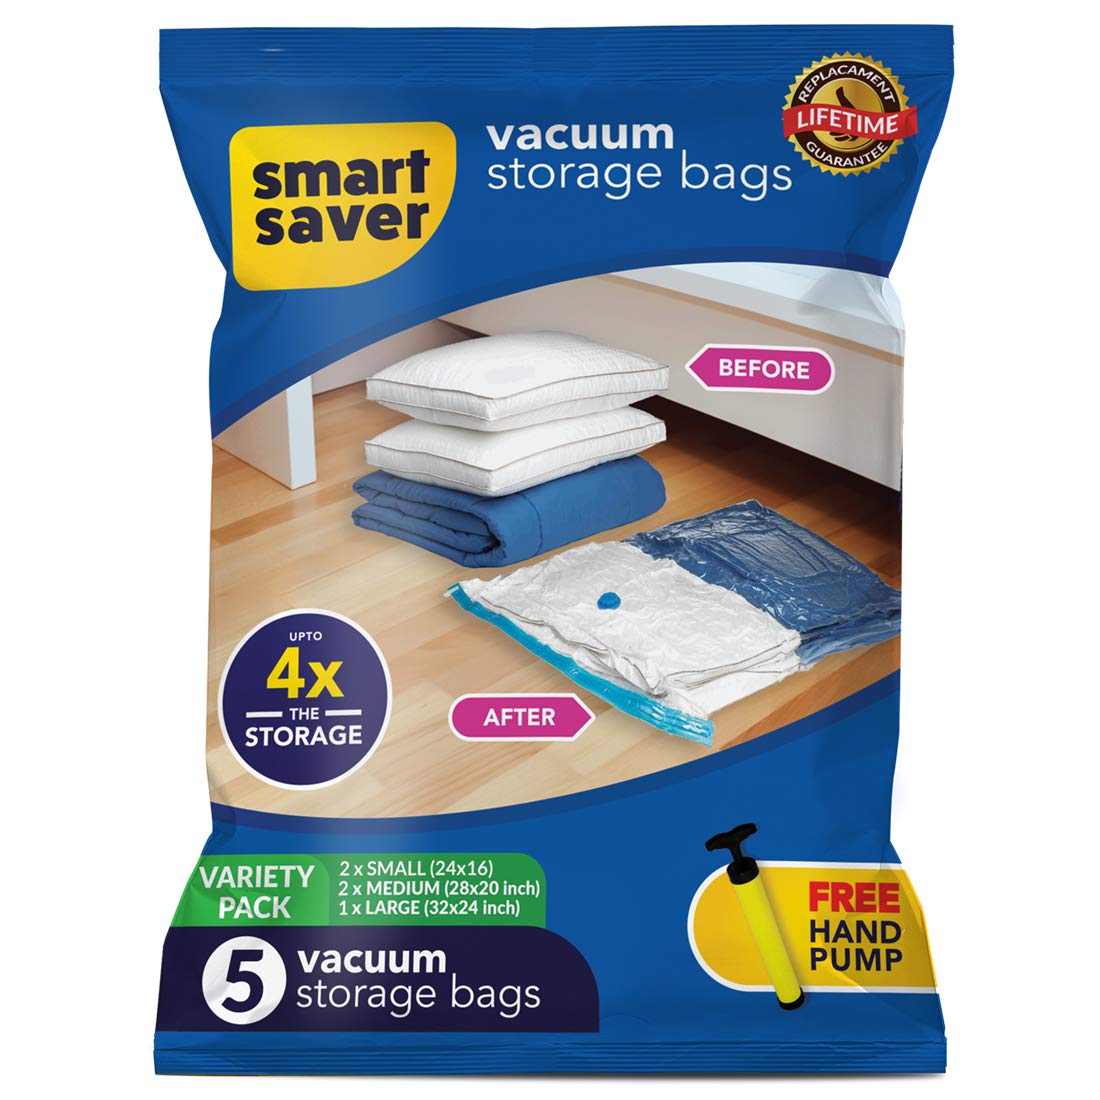 Vacuum Storage Bags with Electric Air Pump,12 Pack Medium Size (28x 18) Vacuum  Sealed Space Save Bag for Clothes, Blanket, Duvets, Pillows, Comforters,  Quilt, Travel.